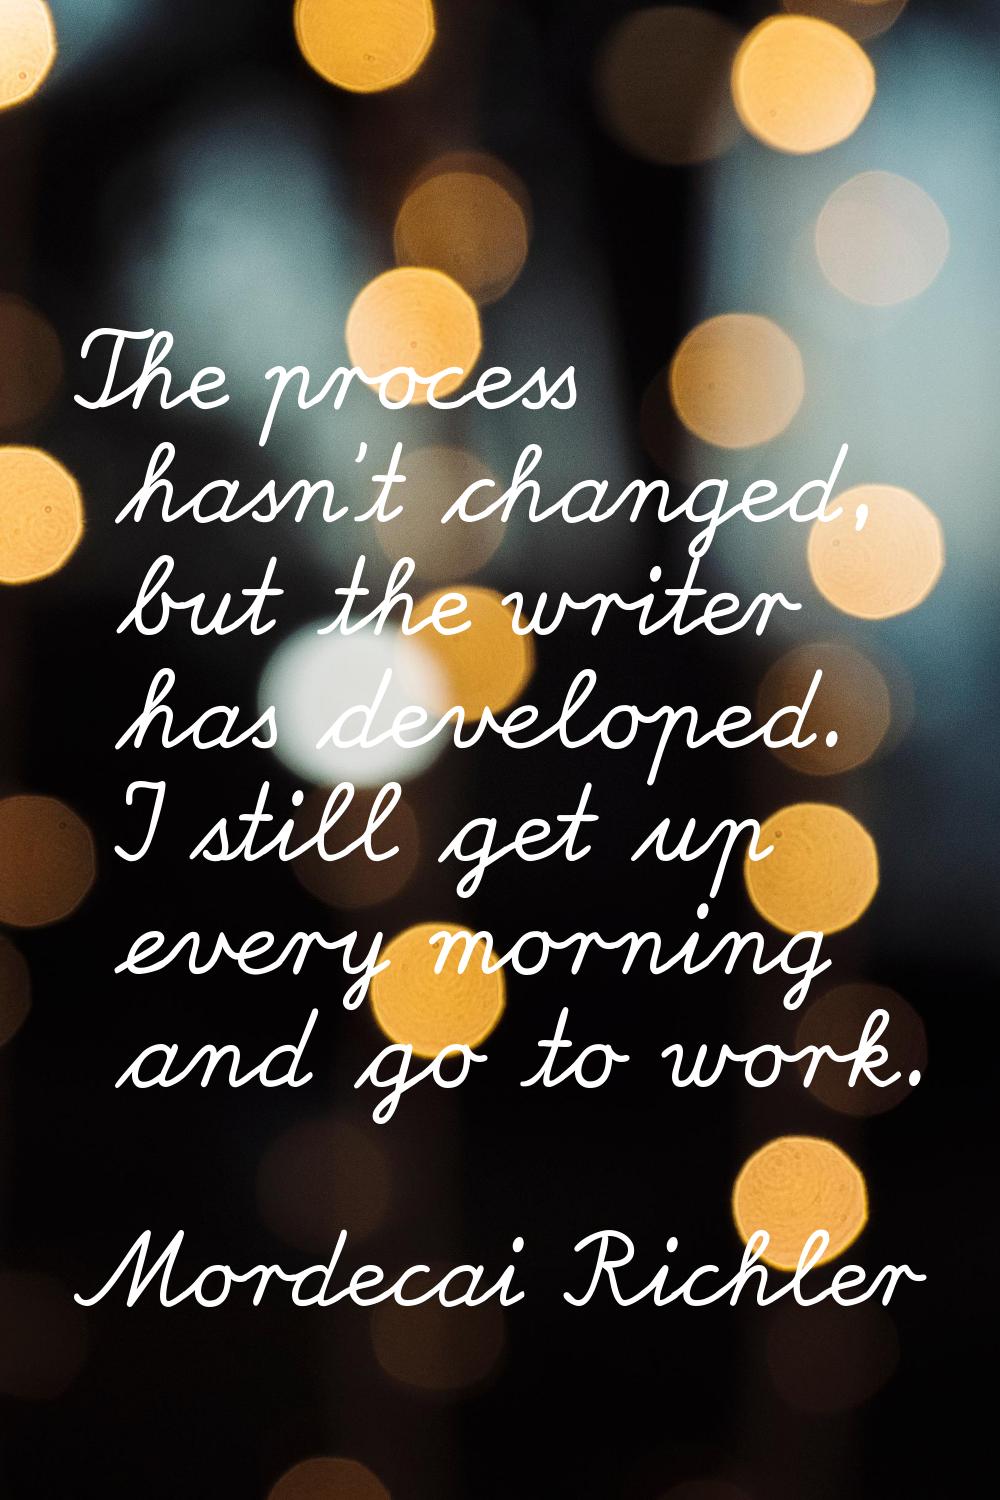 The process hasn't changed, but the writer has developed. I still get up every morning and go to wo